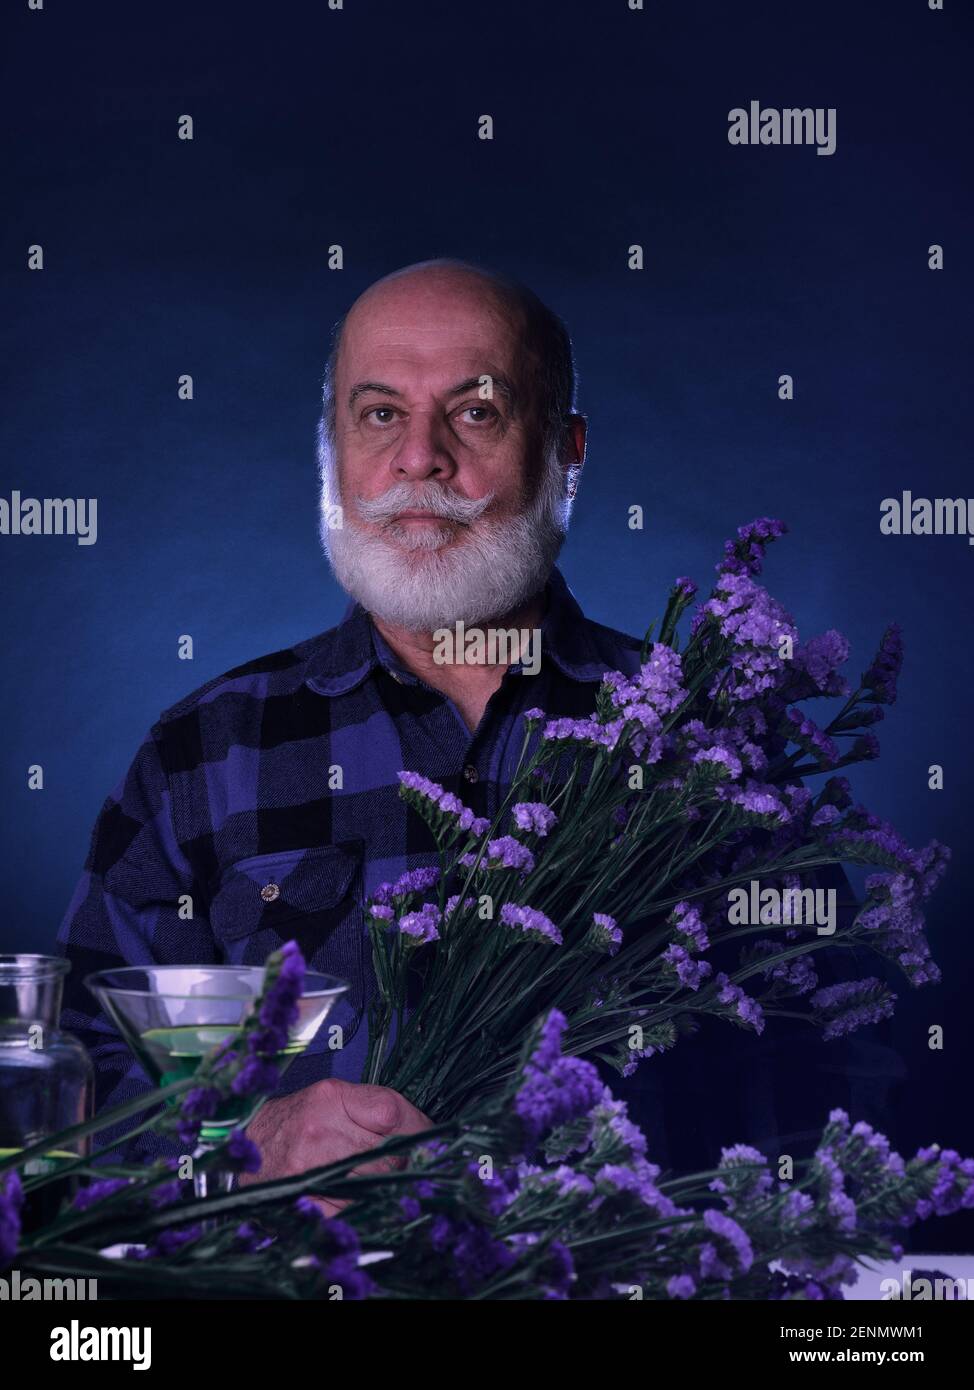 Portrait of elderly man in blue tones holding a bouquet of blue and purple flowers Stock Photo